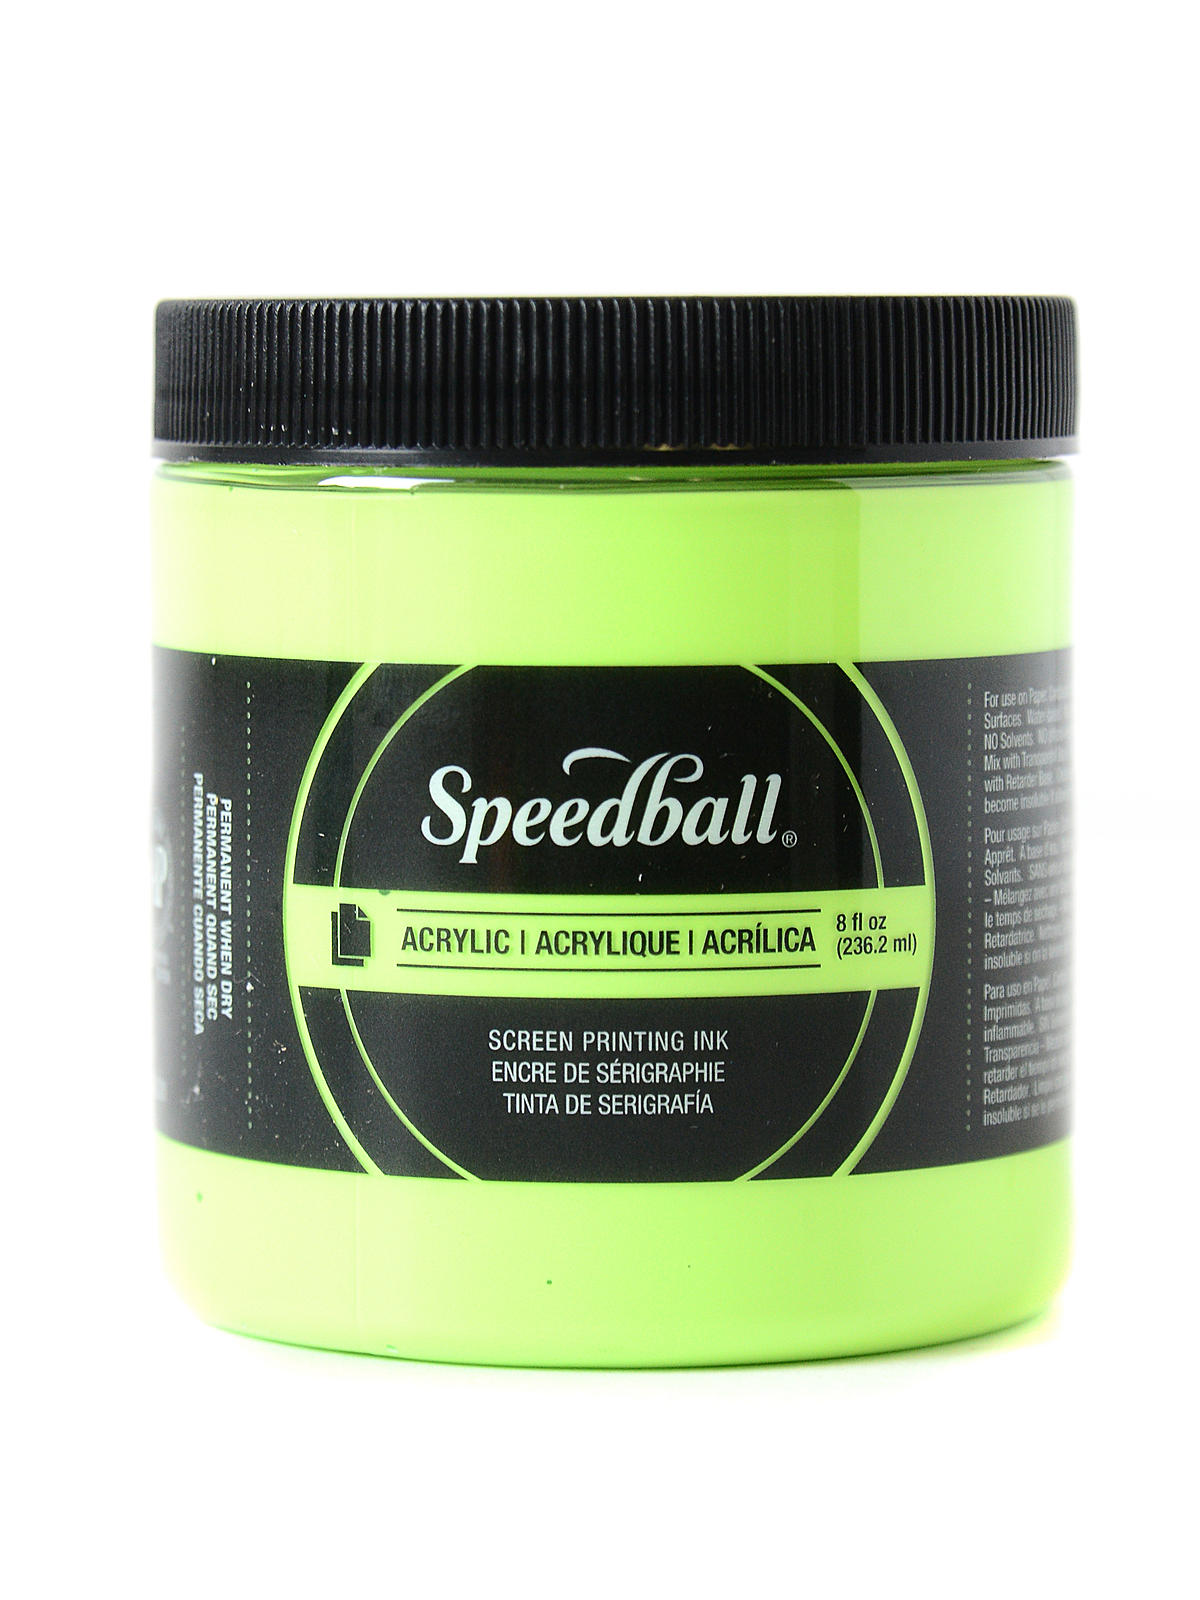 Acrylic Screen Printing Ink Fluorescent Lime Green 8 Oz.